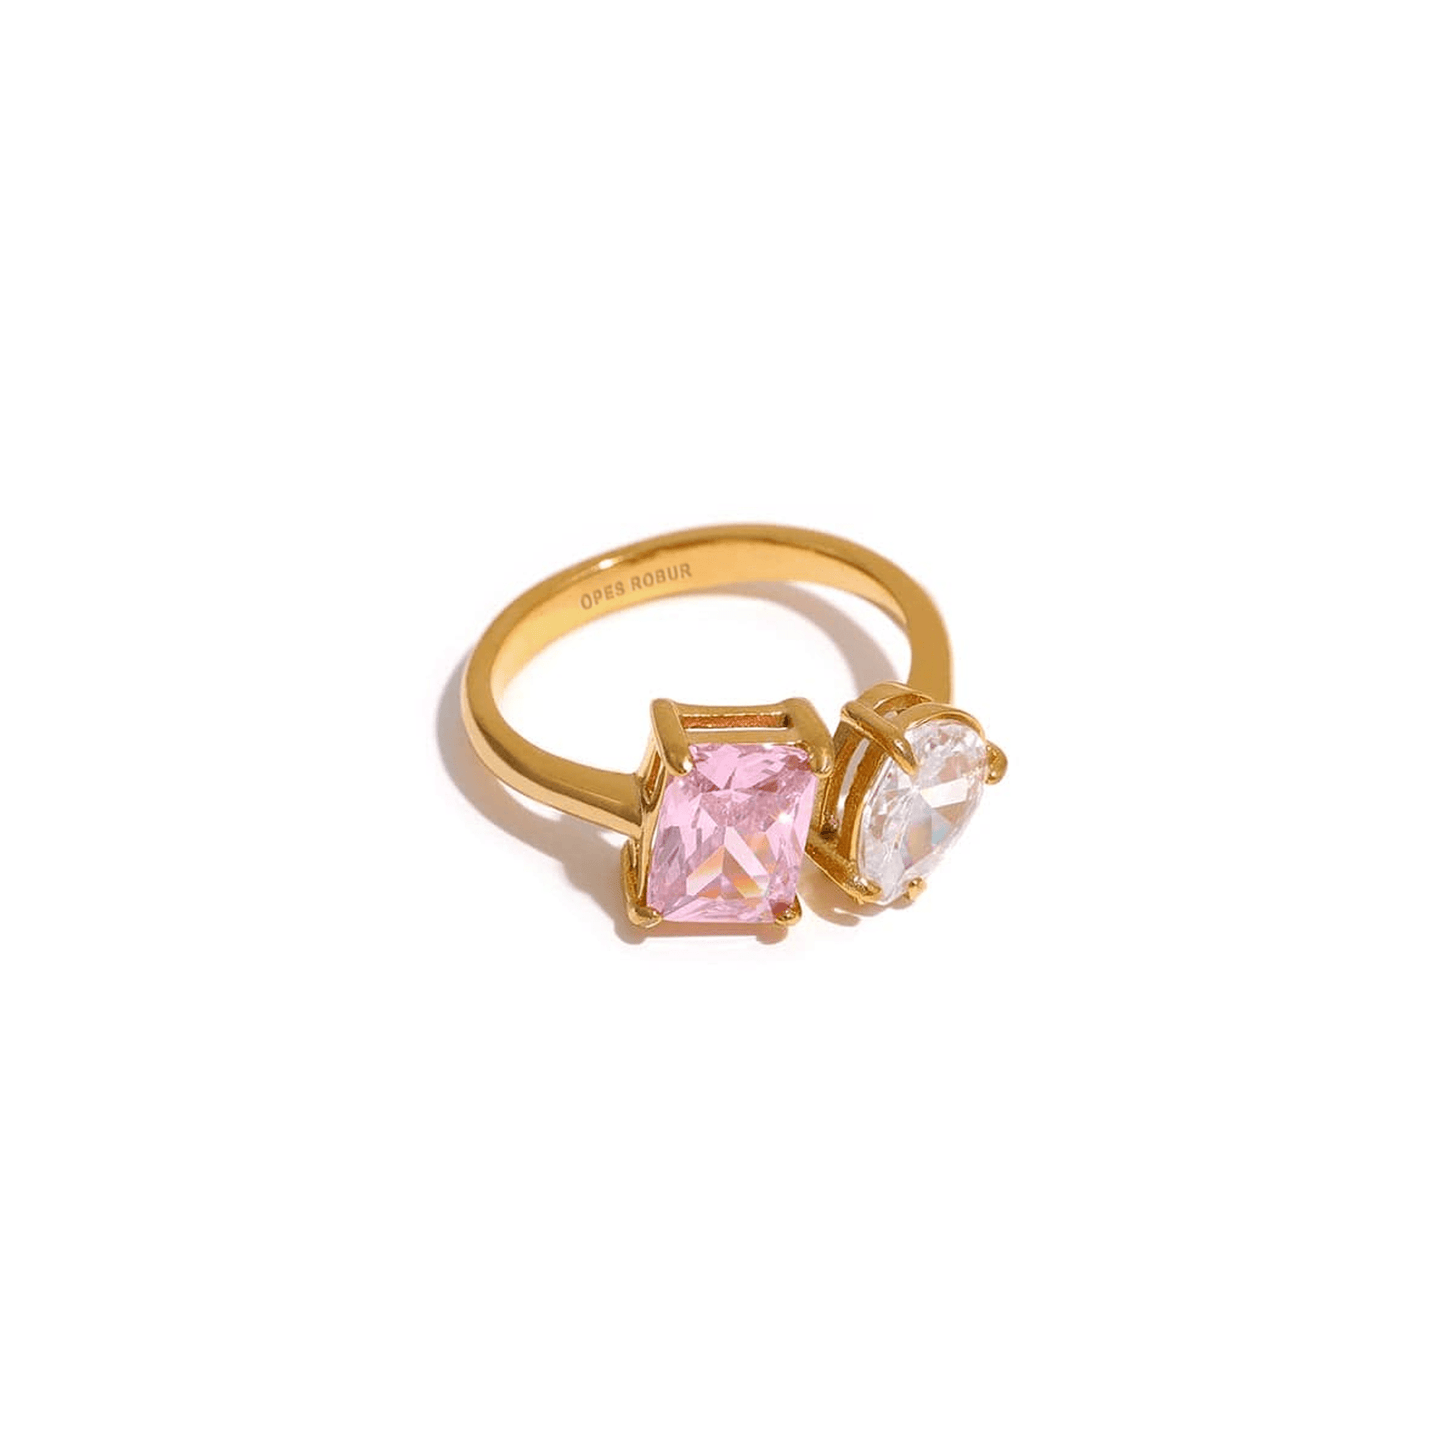 Opes Robur Gold / Pink / One Size (resizable) LEGACY RING